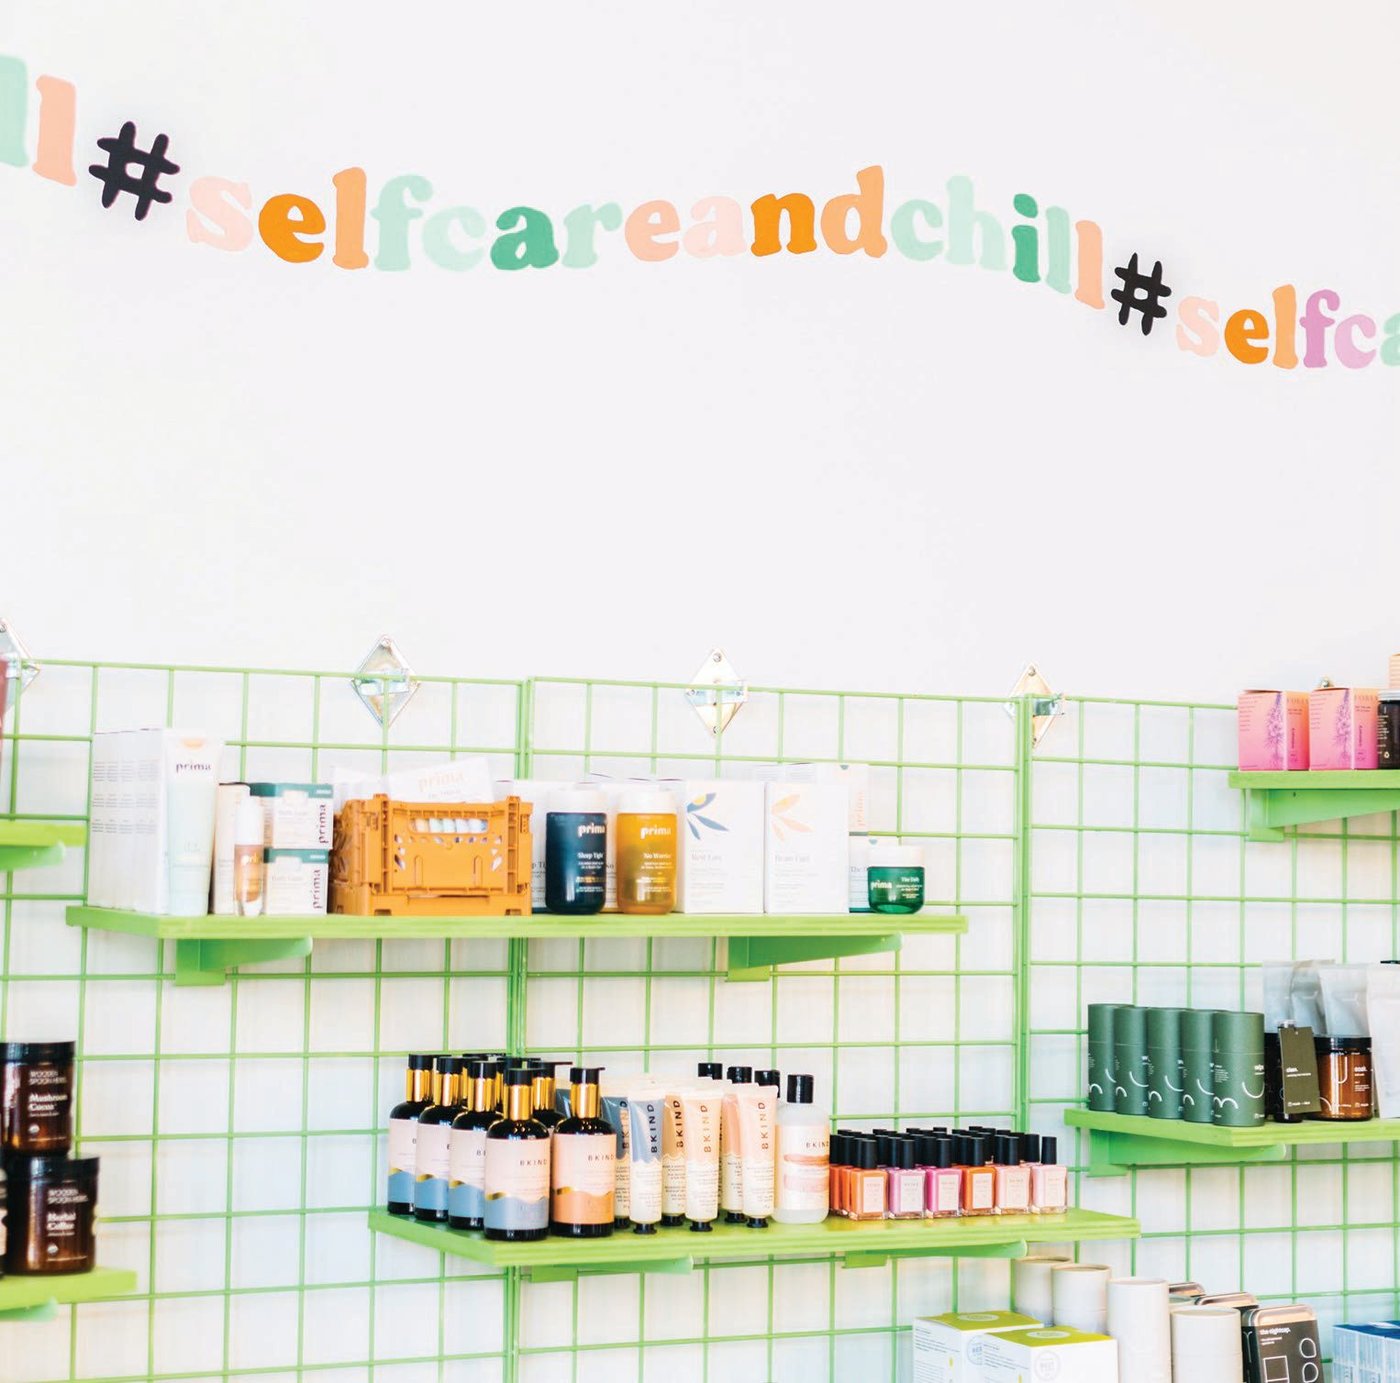 Pamper yourself with products at the new wellness shop in the Heights. PHOTO COURTESY OF BRAND